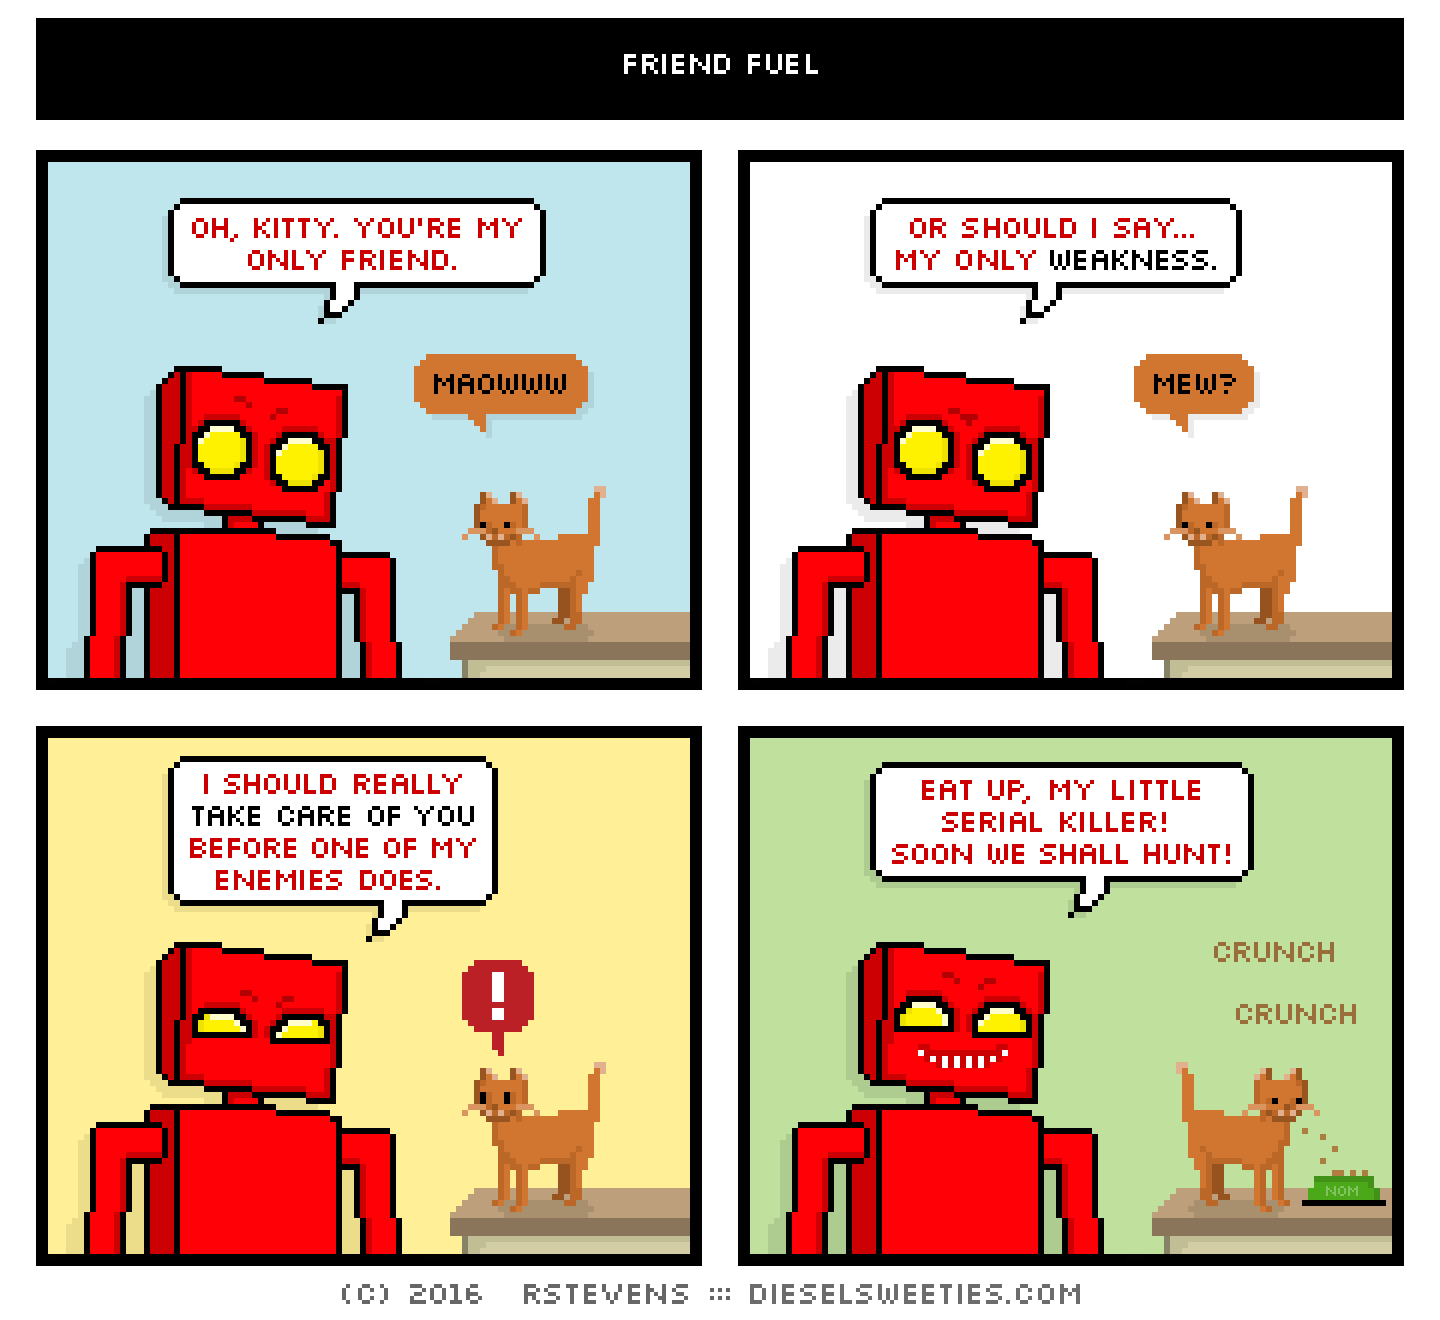 red robot, roger the cat : oh, kitty. you're my only friend. maoww or should i say... my only weakness. mew? i should really take care of you before one of my enemies does. ! eat up, my little serial killer! soon we shall hunt! crunch crunch nom nom food bowl